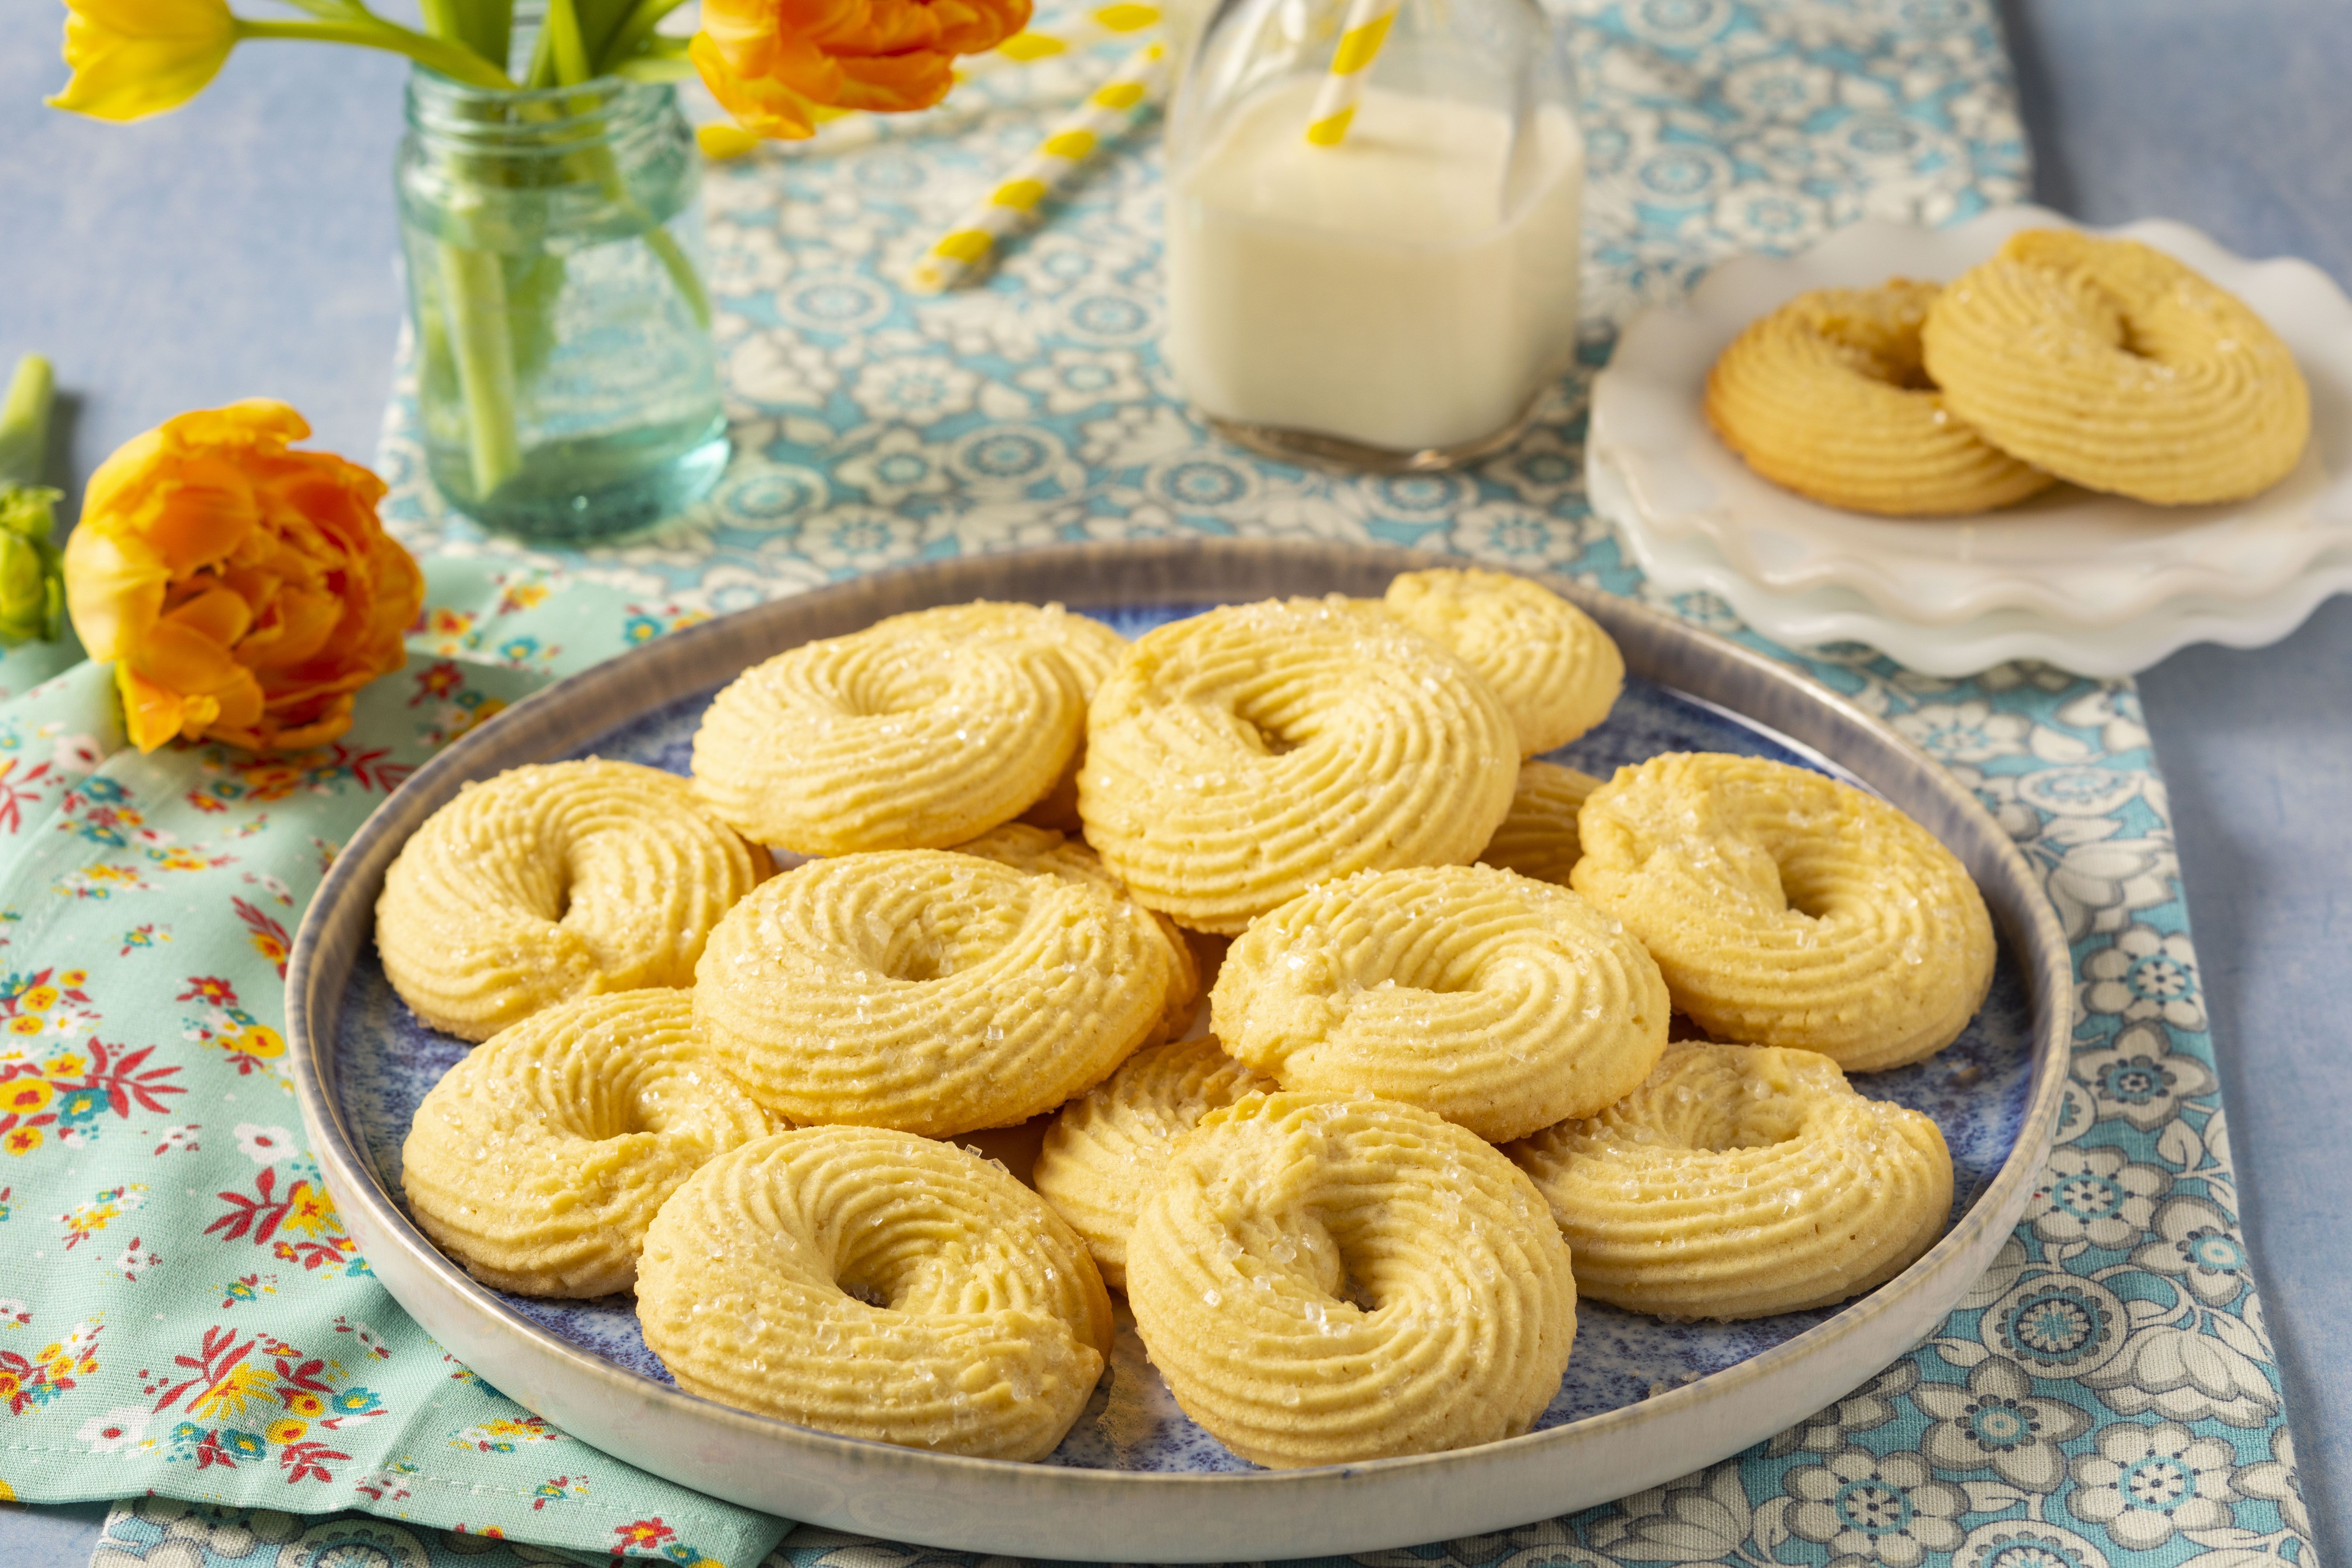 Here's what the individual Danish #Butter #Cookies are actually